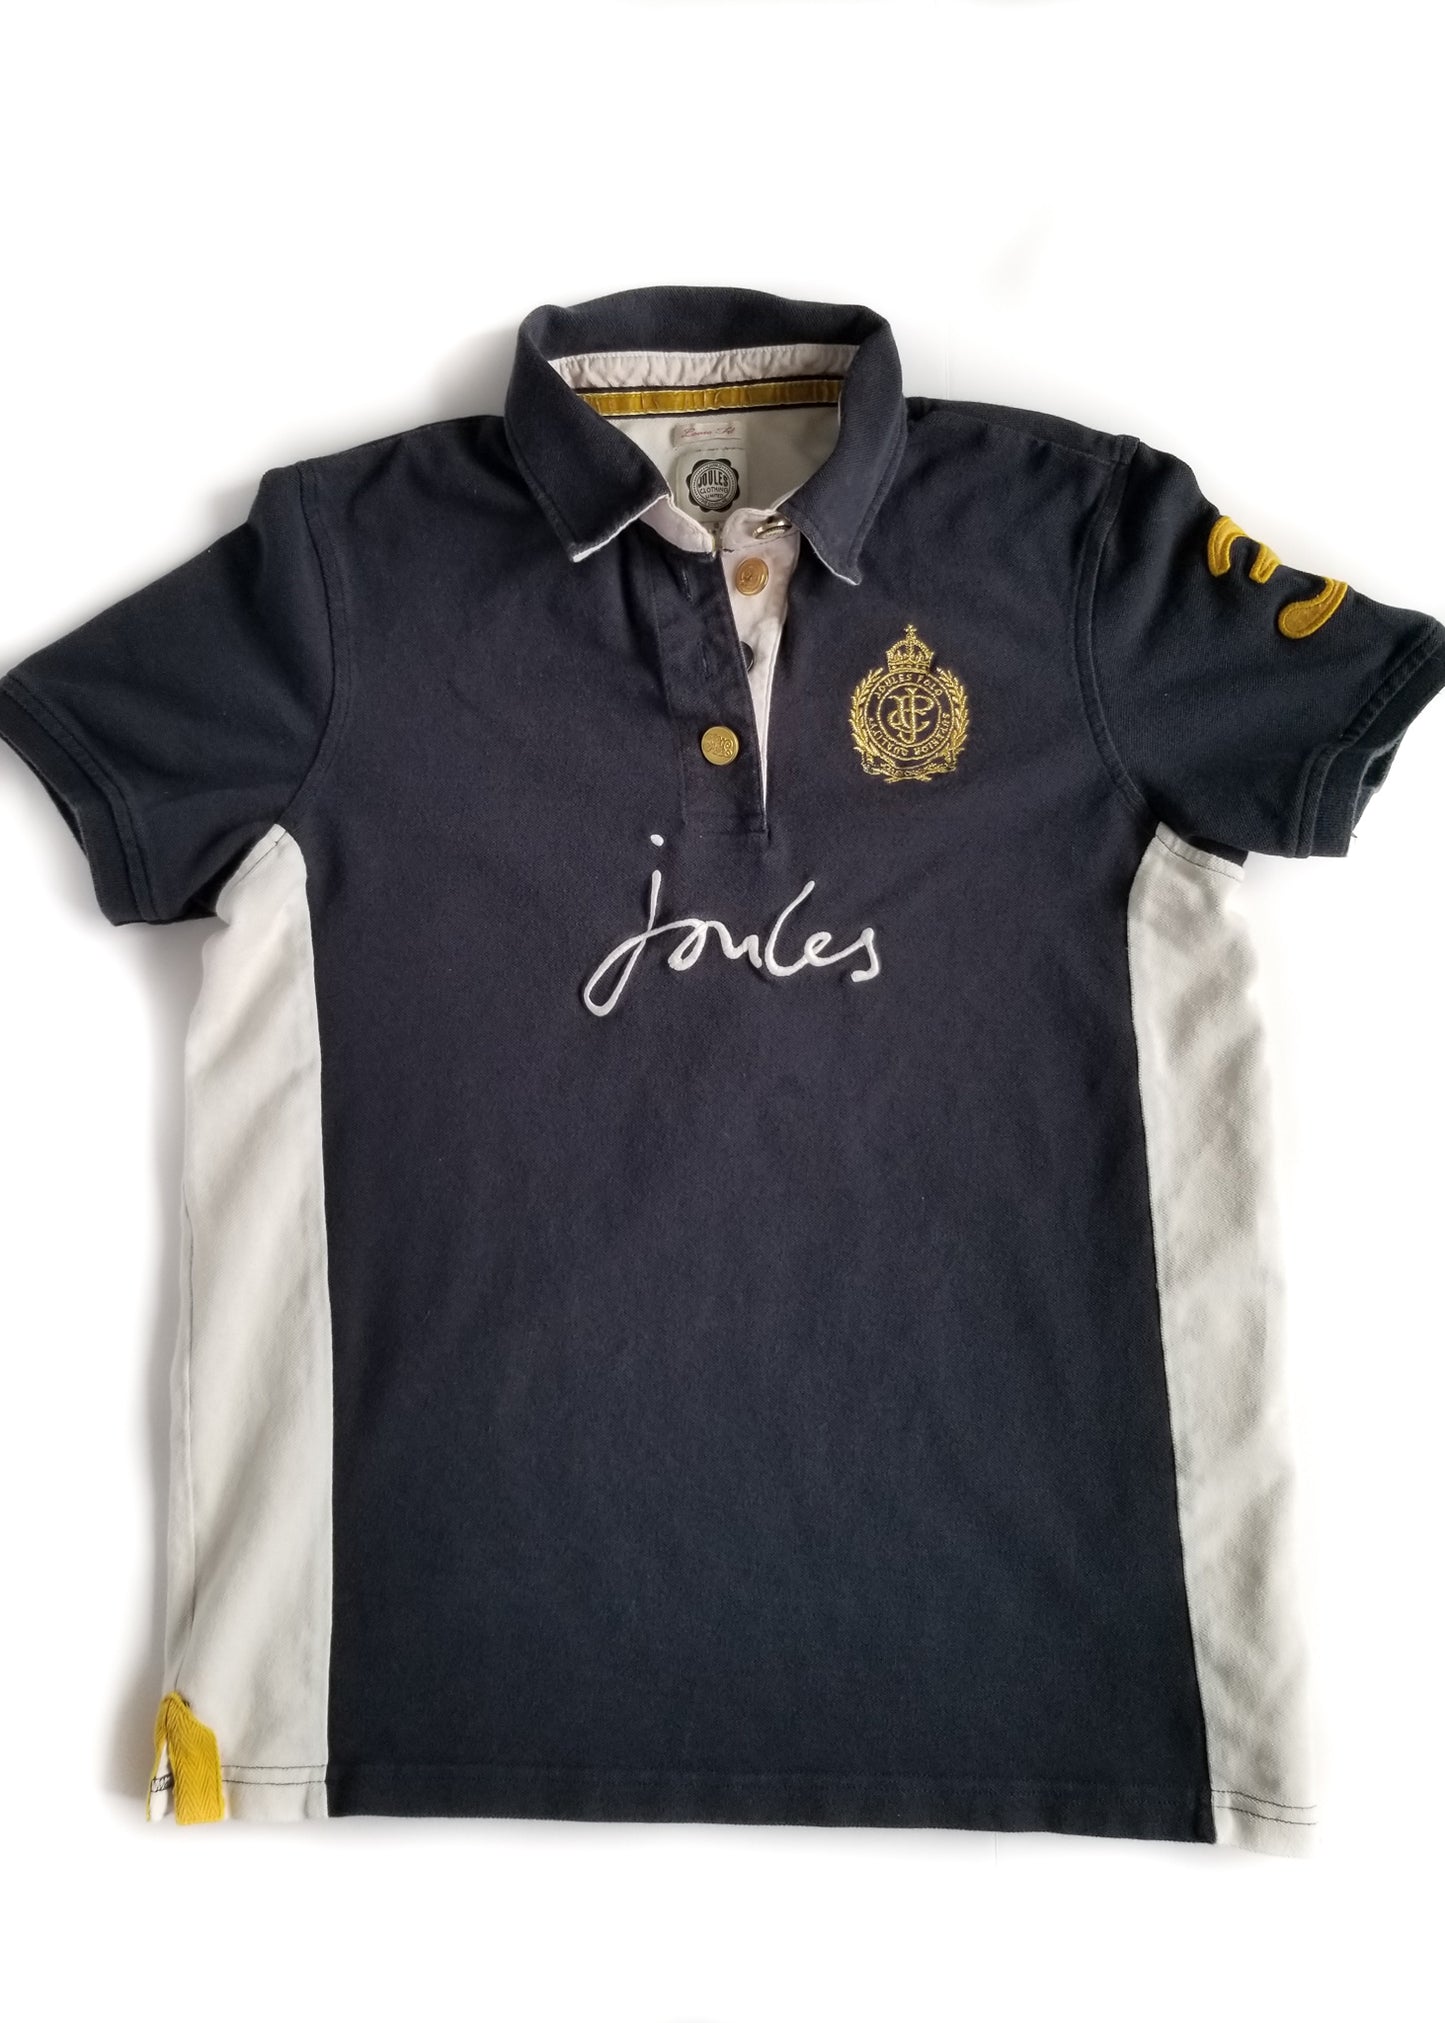 Joules Ascot Loose Fit Polo - Navy - Women's Size 6 (US)